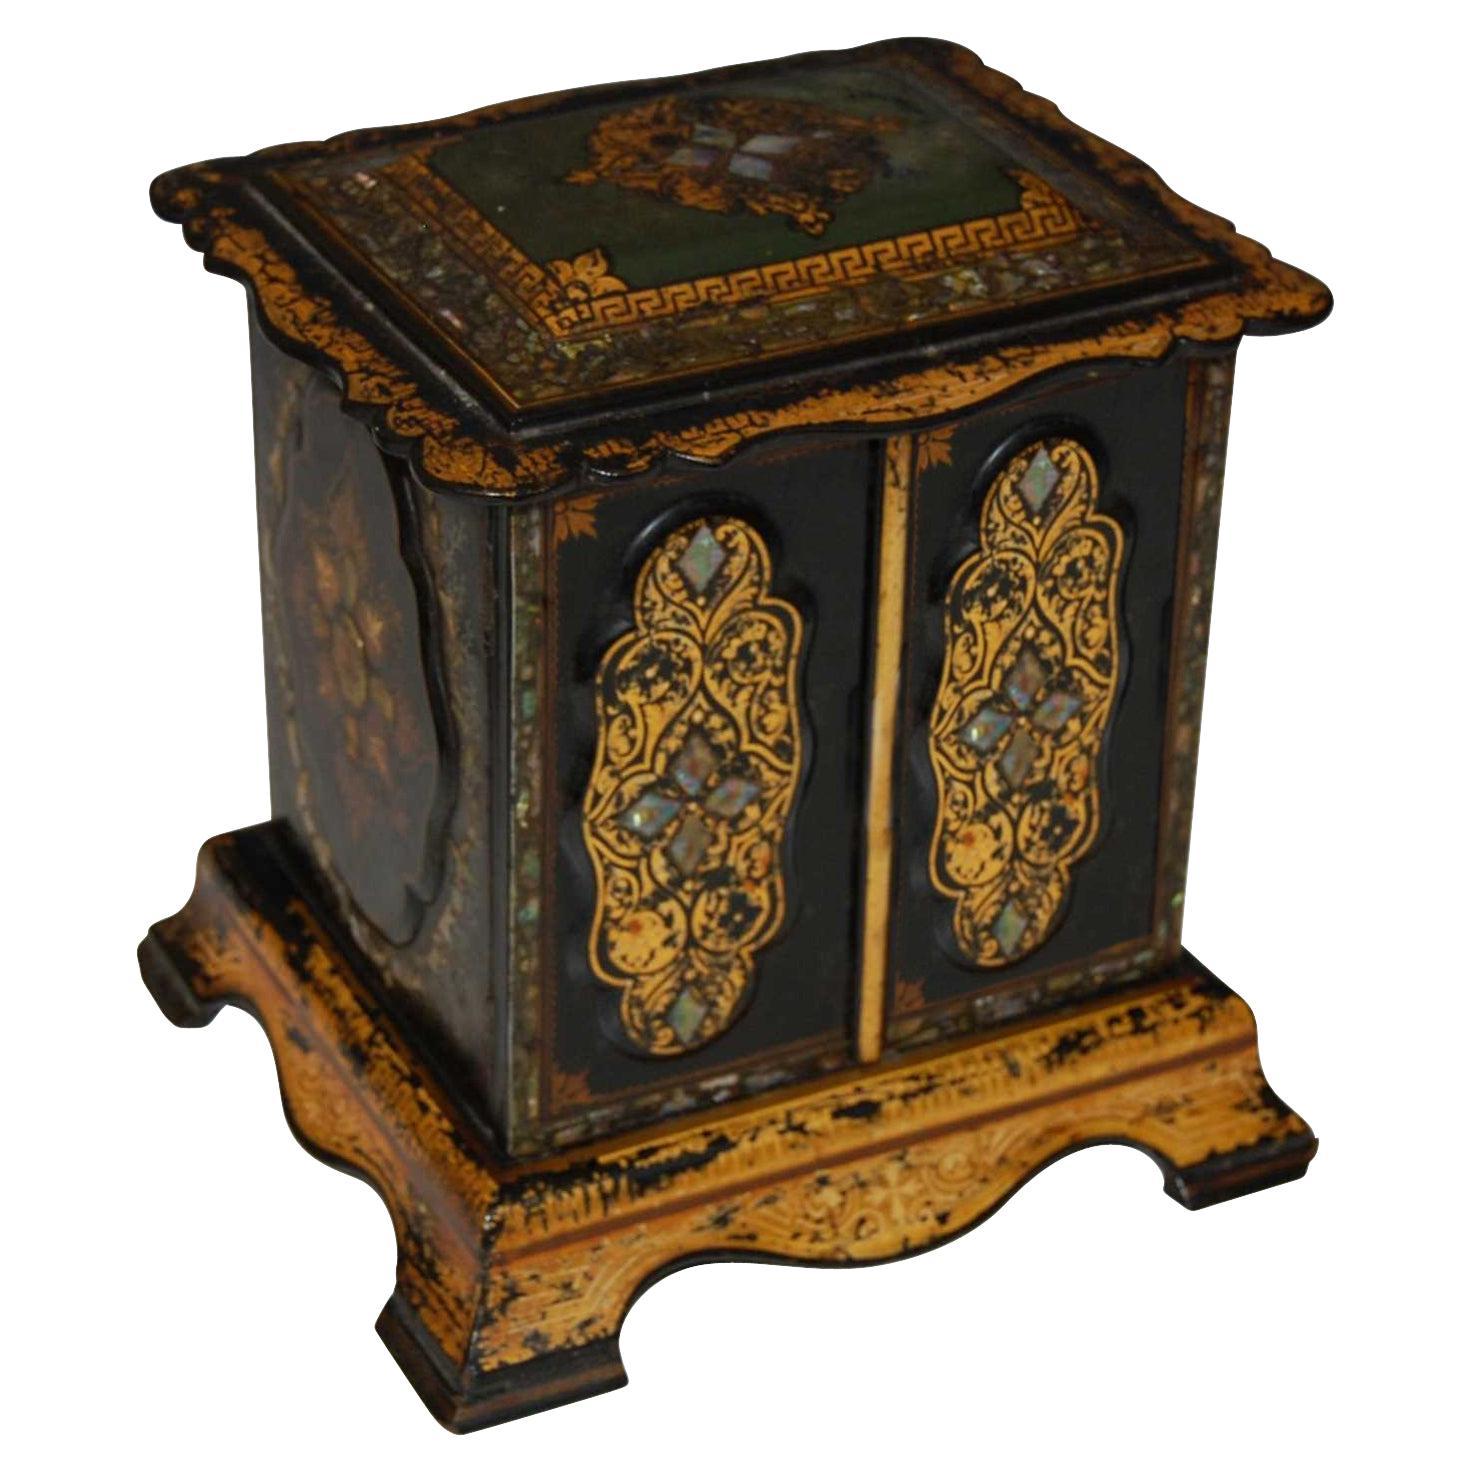 Queen Victoria's Historic Mother of Pearl Inlaid Ebonised Papier Mâché Cabinet For Sale